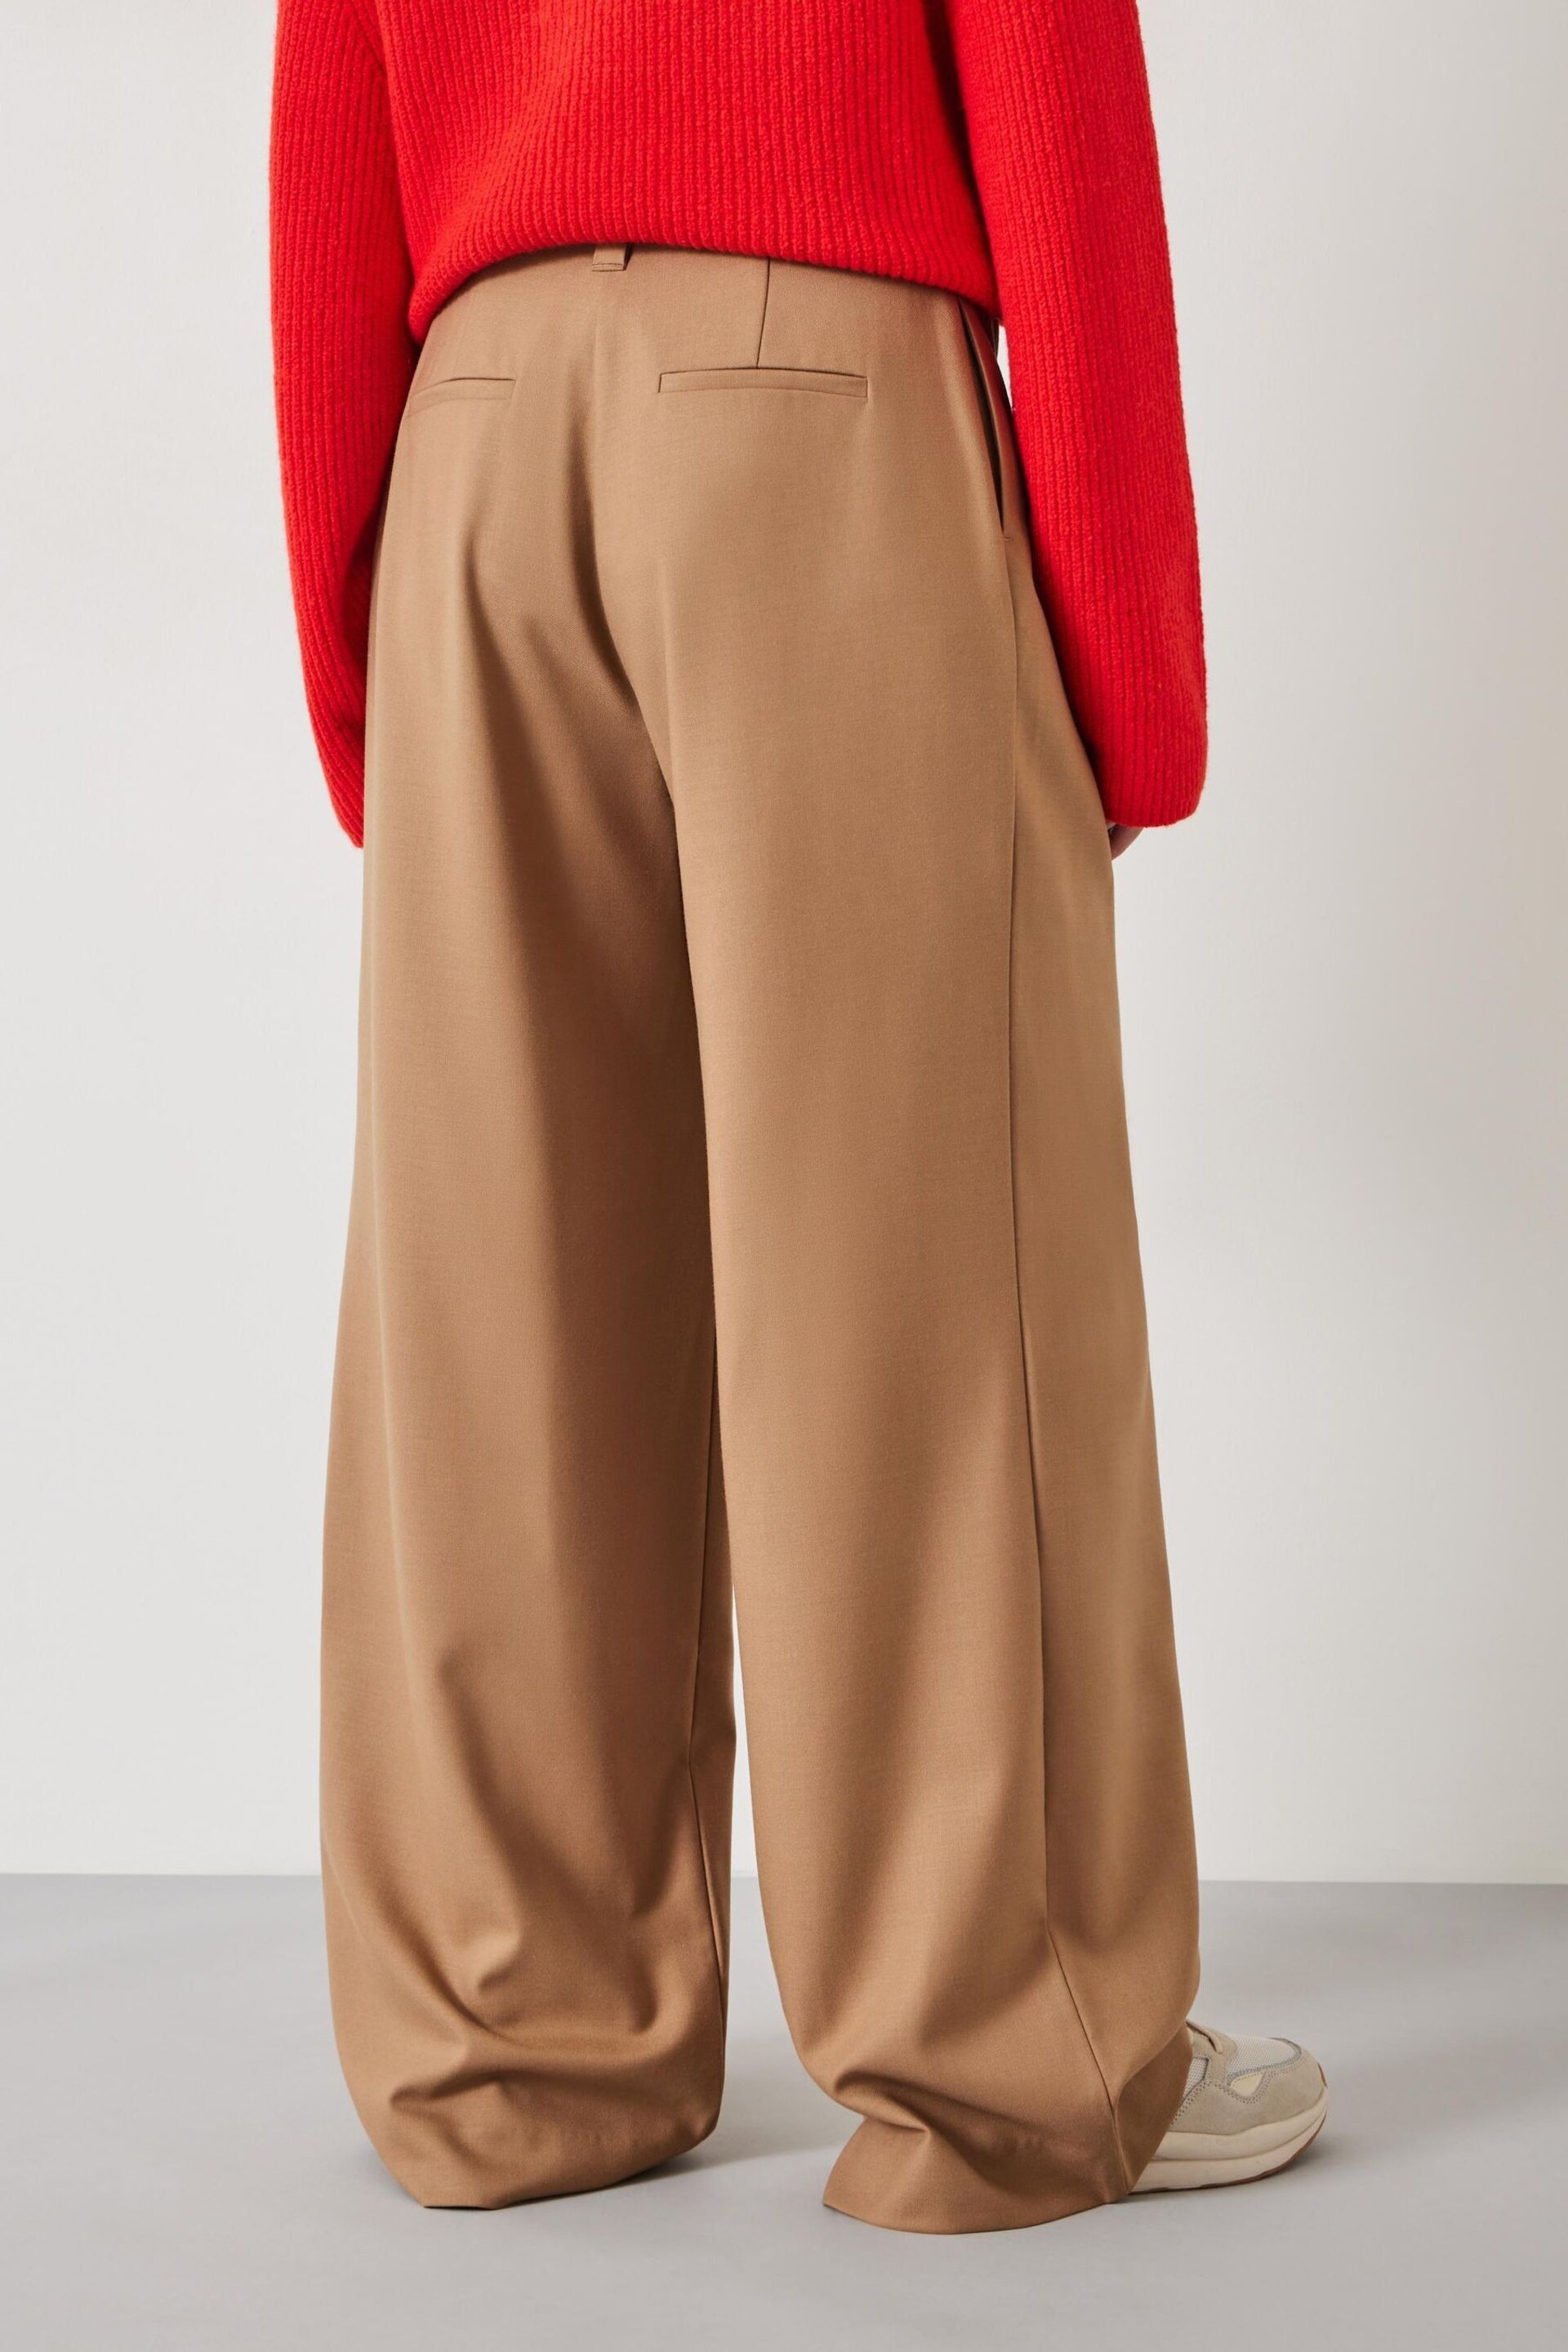 Hush Brown Aoife High Waist Trousers - Image 2 of 5